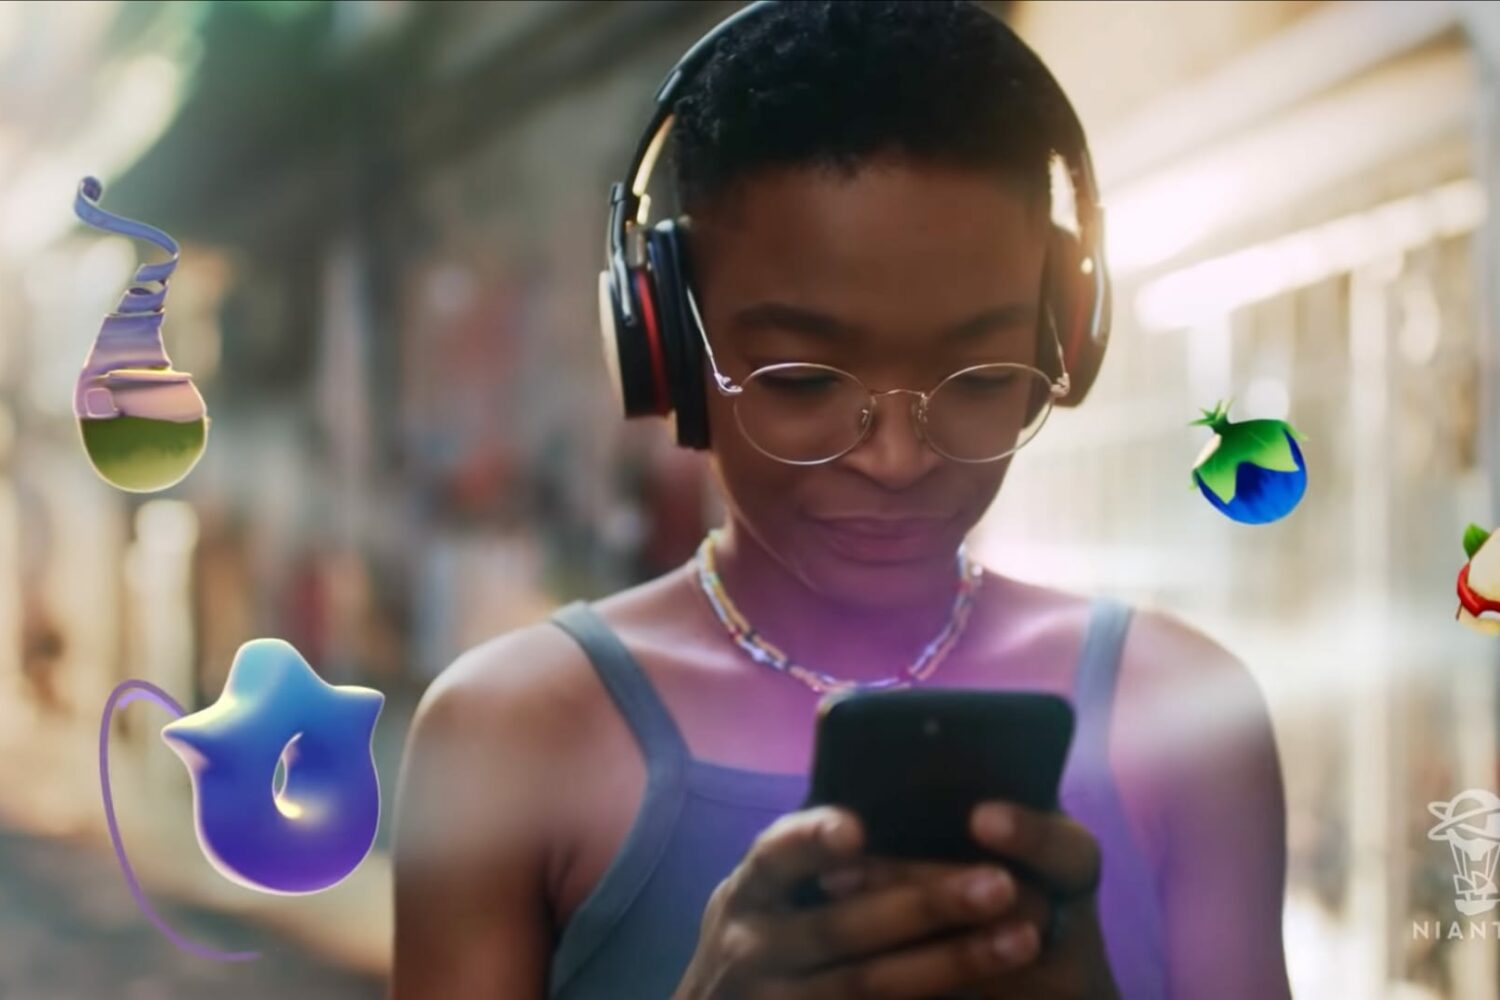 A young girl playing the AR pet simulator Peridots on her iPhone can be seen in this still taken from Niantic's official teaser